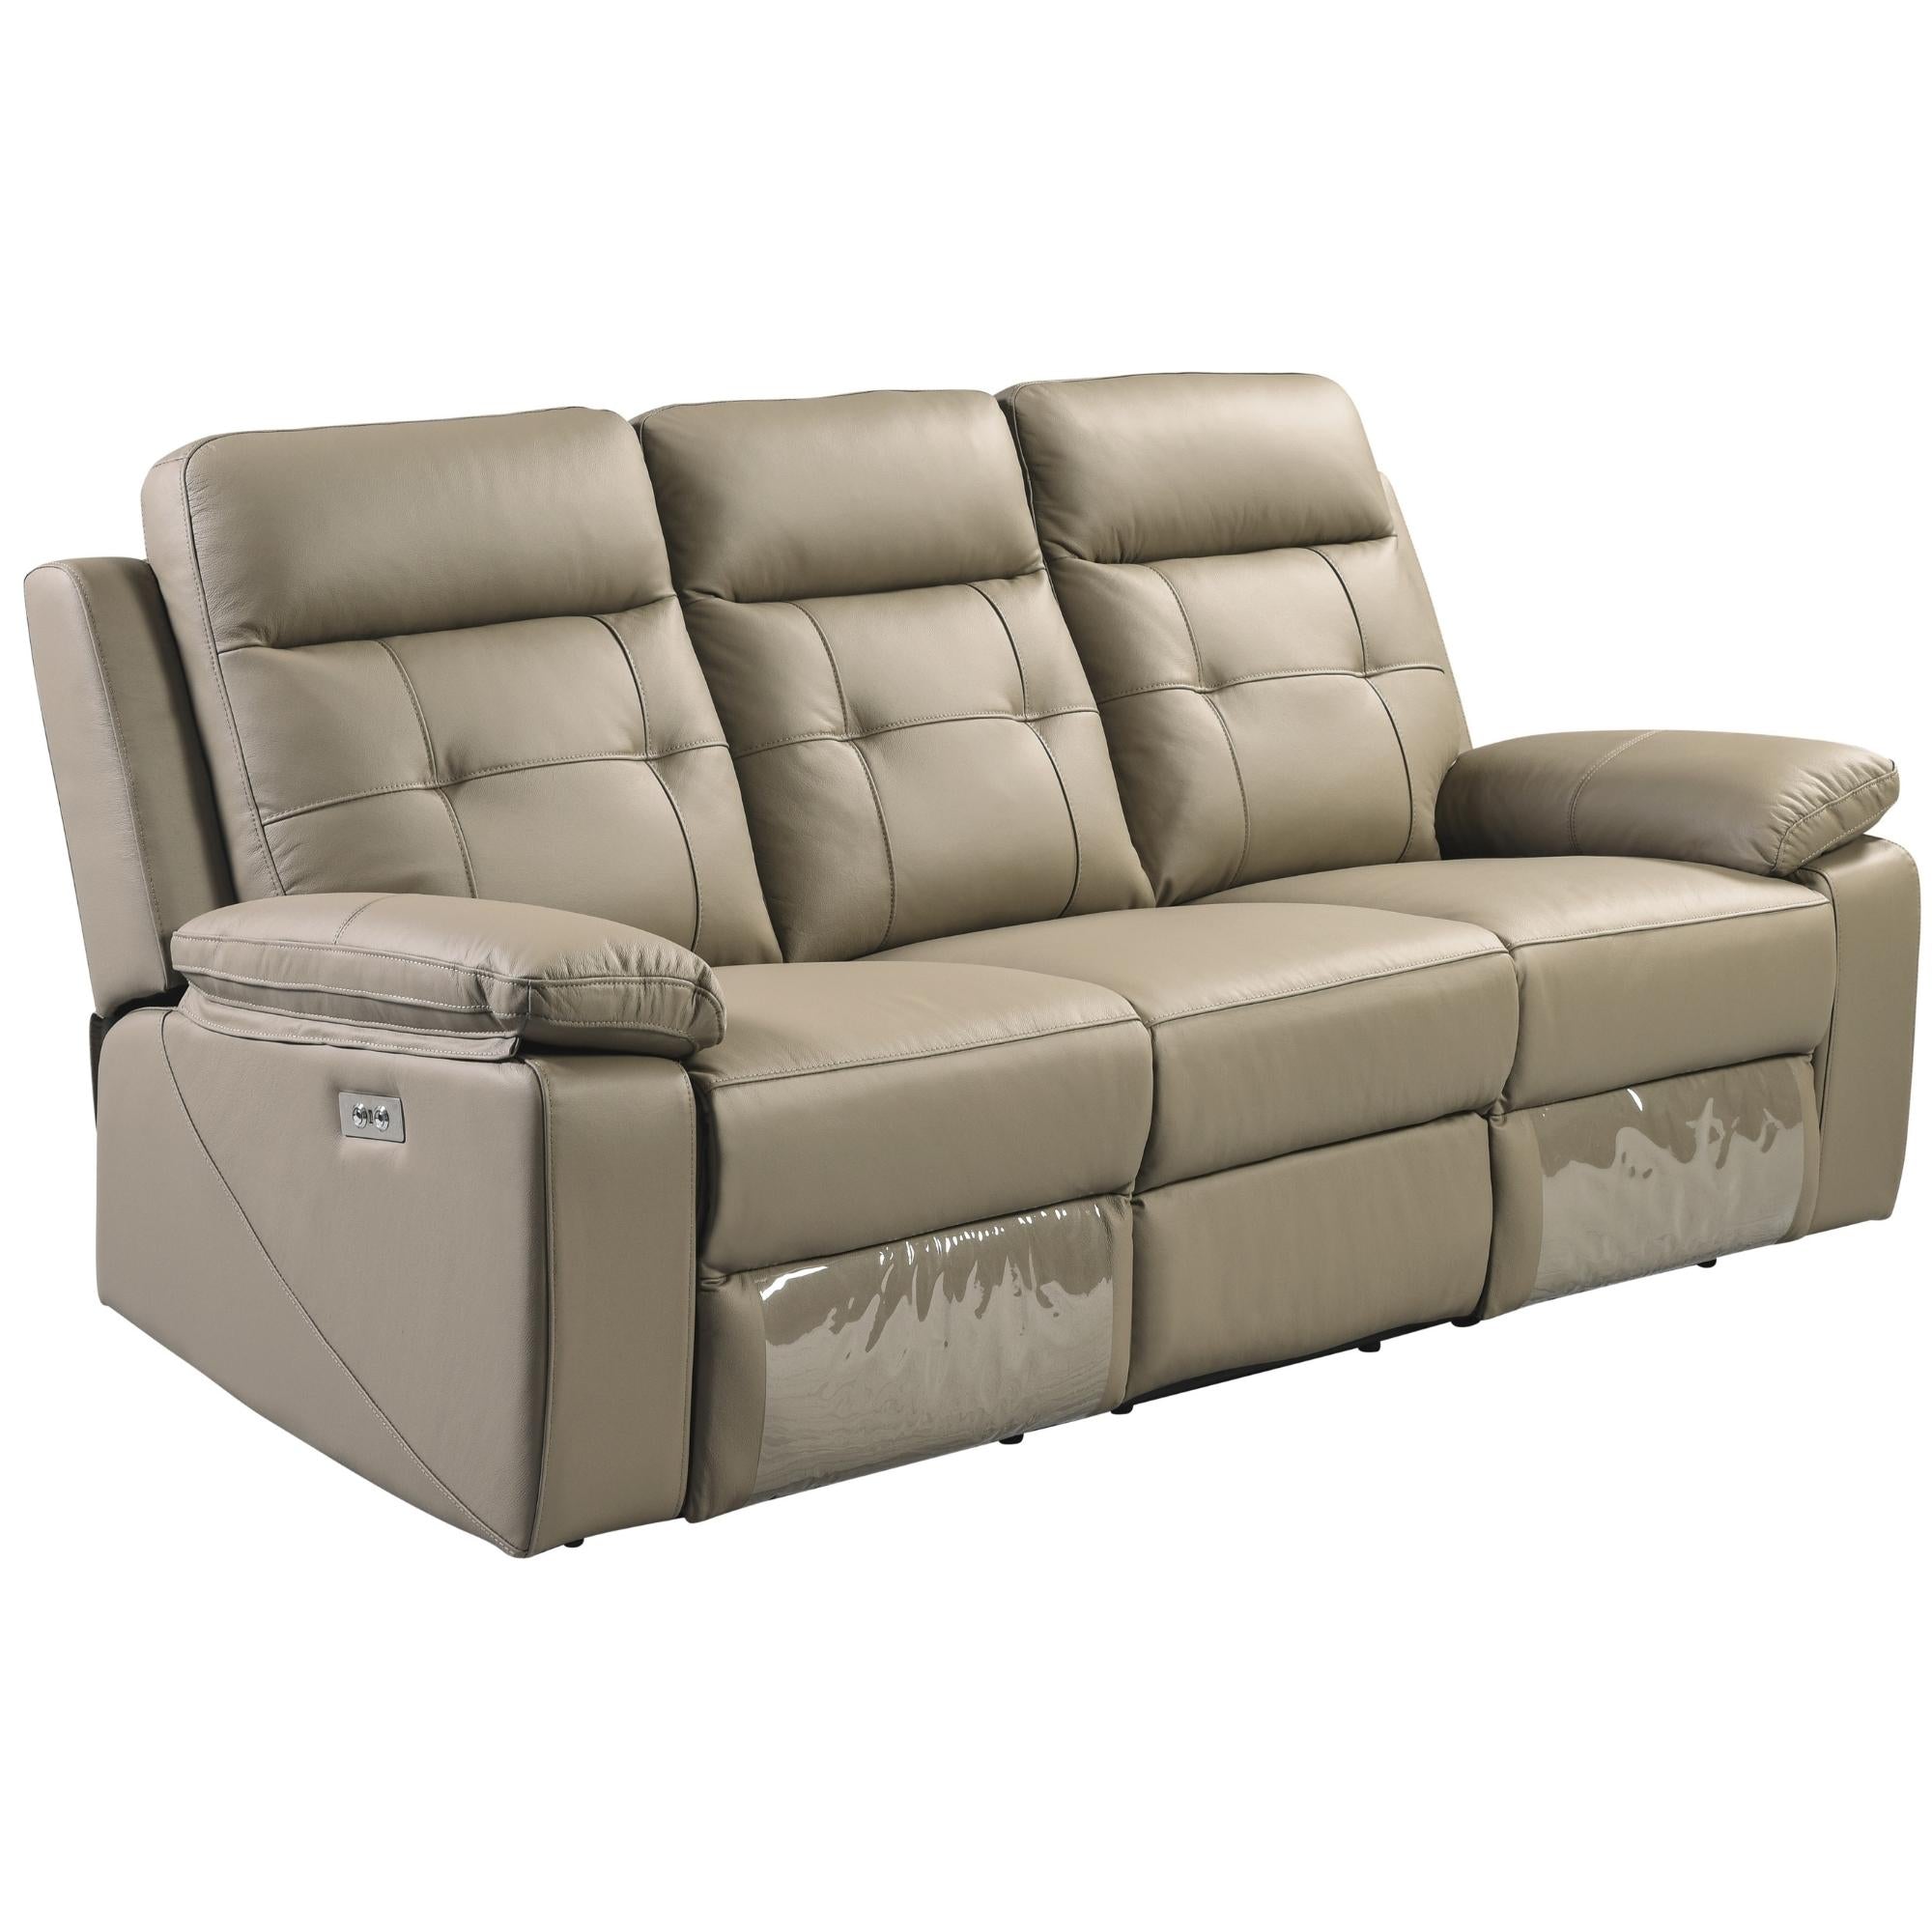 3 + 1 Seater Electric Recliner Sofa Genuine Leather Home Theater Lounge